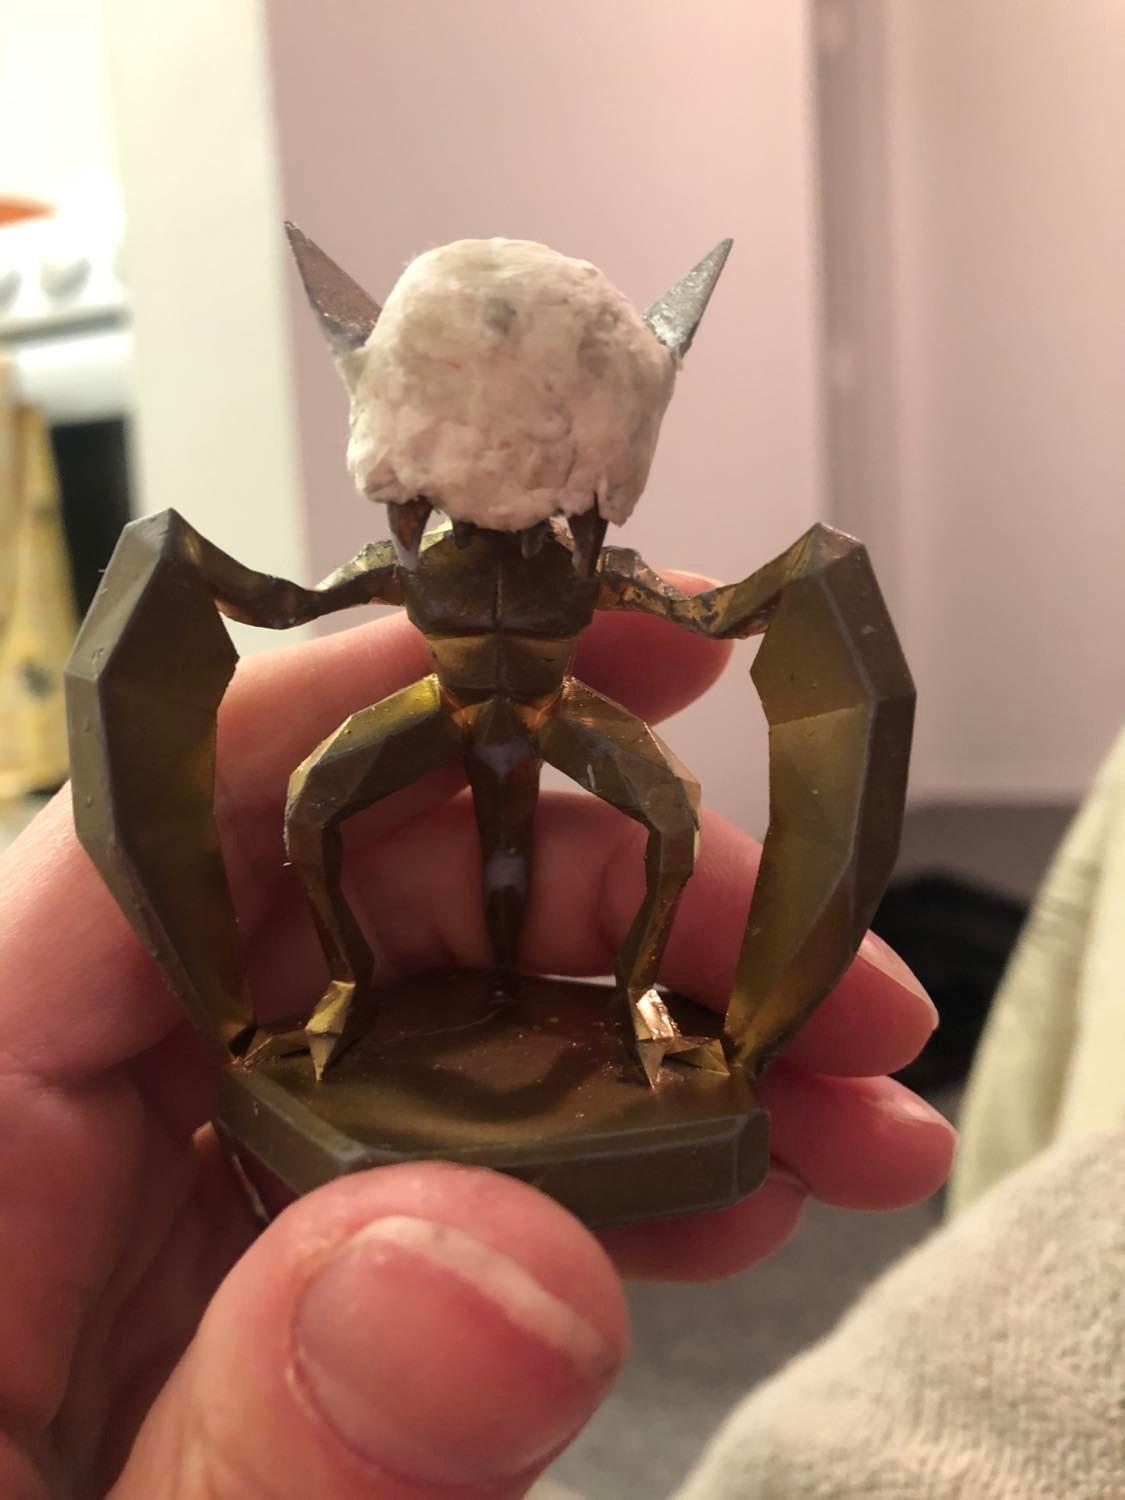 Kabutroid's head made with tissue balled and glued to create the round head, and the side planes from the original head are angled upwards to turn into Kabutroid's ears.